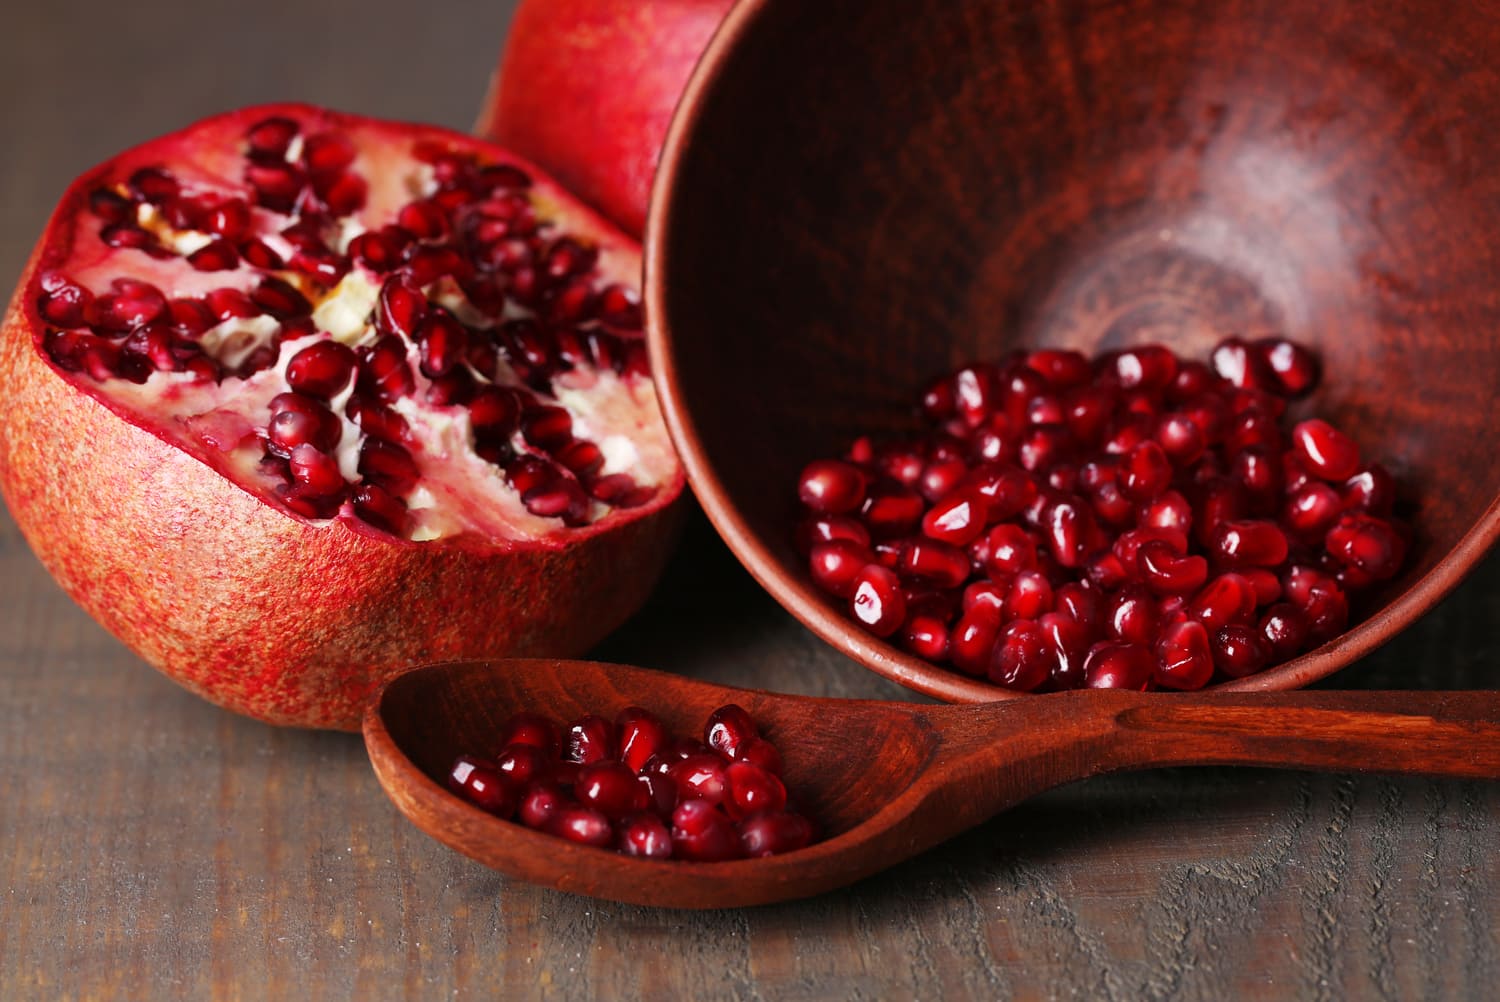 10 Indian superfoods to help prevent breast cancer